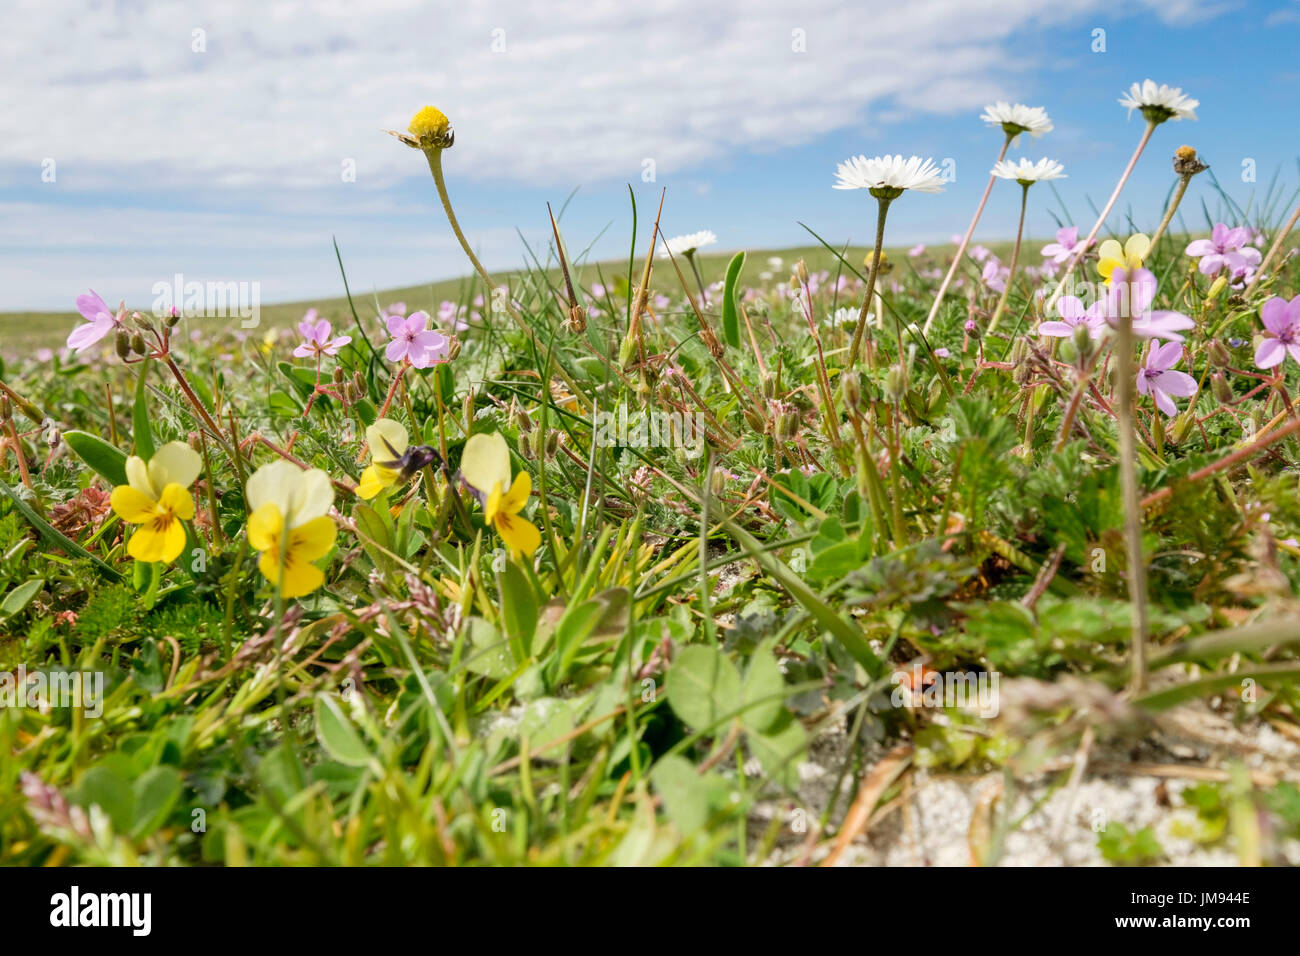 Scottish wildflowers growing in machair grassland in summer at Balranald Nature Reserve, Hougharry North Uist Outer Hebrides Western Isles Scotland UK Stock Photo